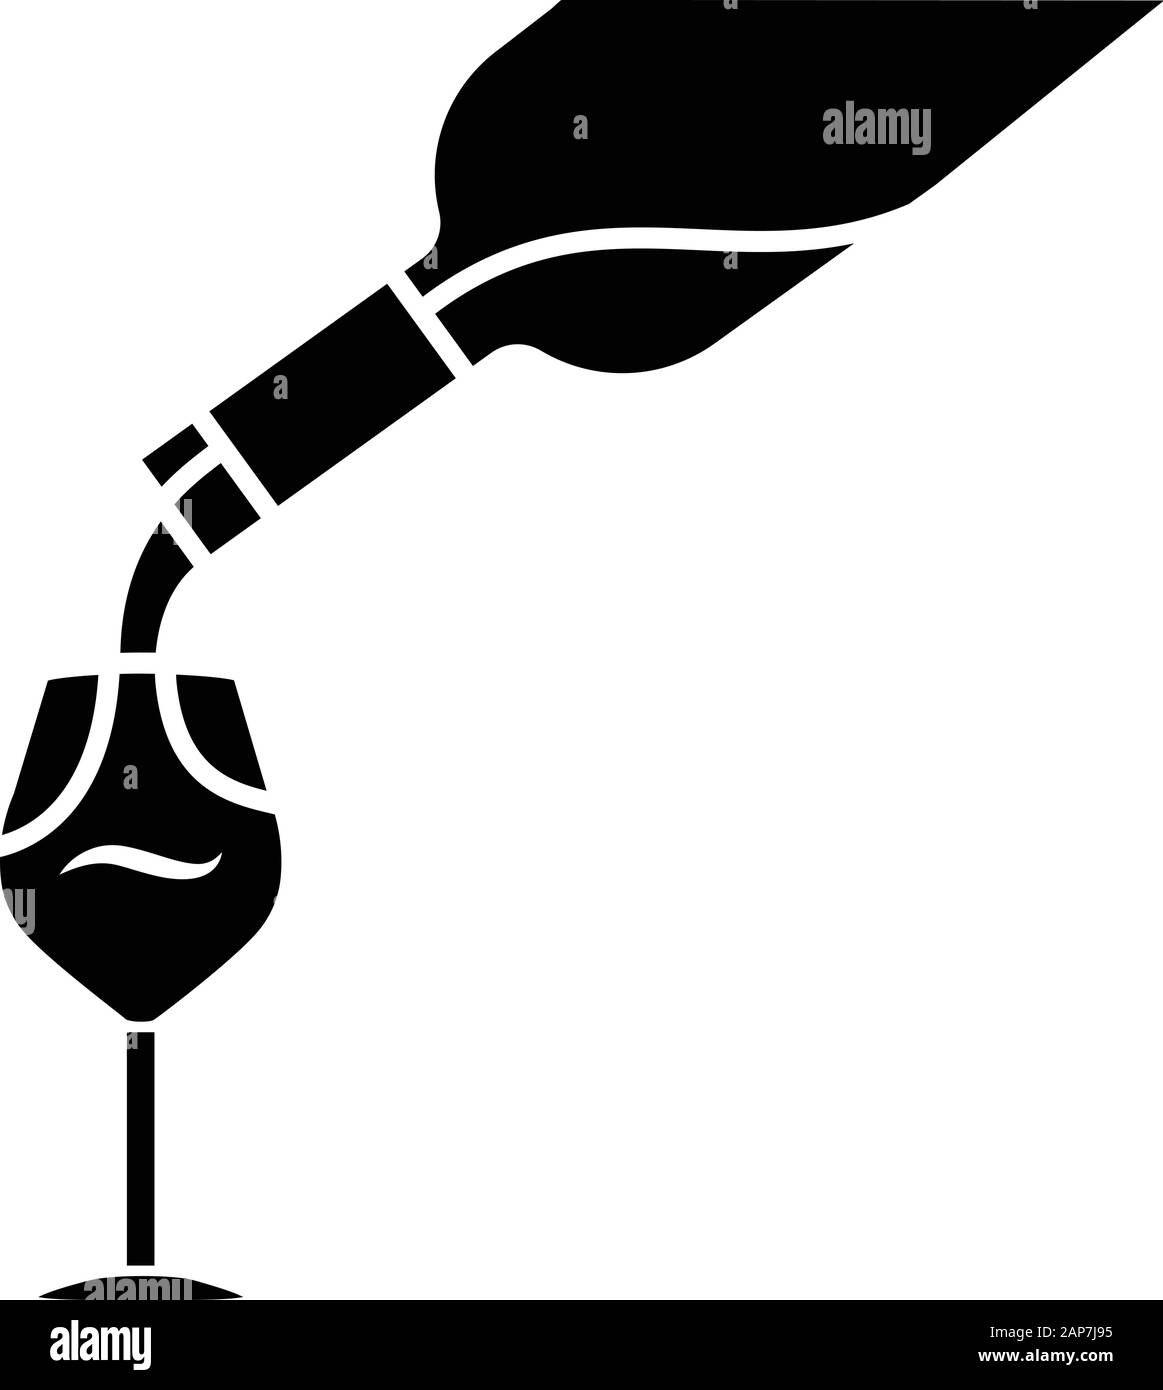 Wine service glyph icon. Alcohol beverage pouring in glass. Bar, restaurant aperitif drink bottle. Barman, sommelier, winery. Silhouette symbol. Negat Stock Vector